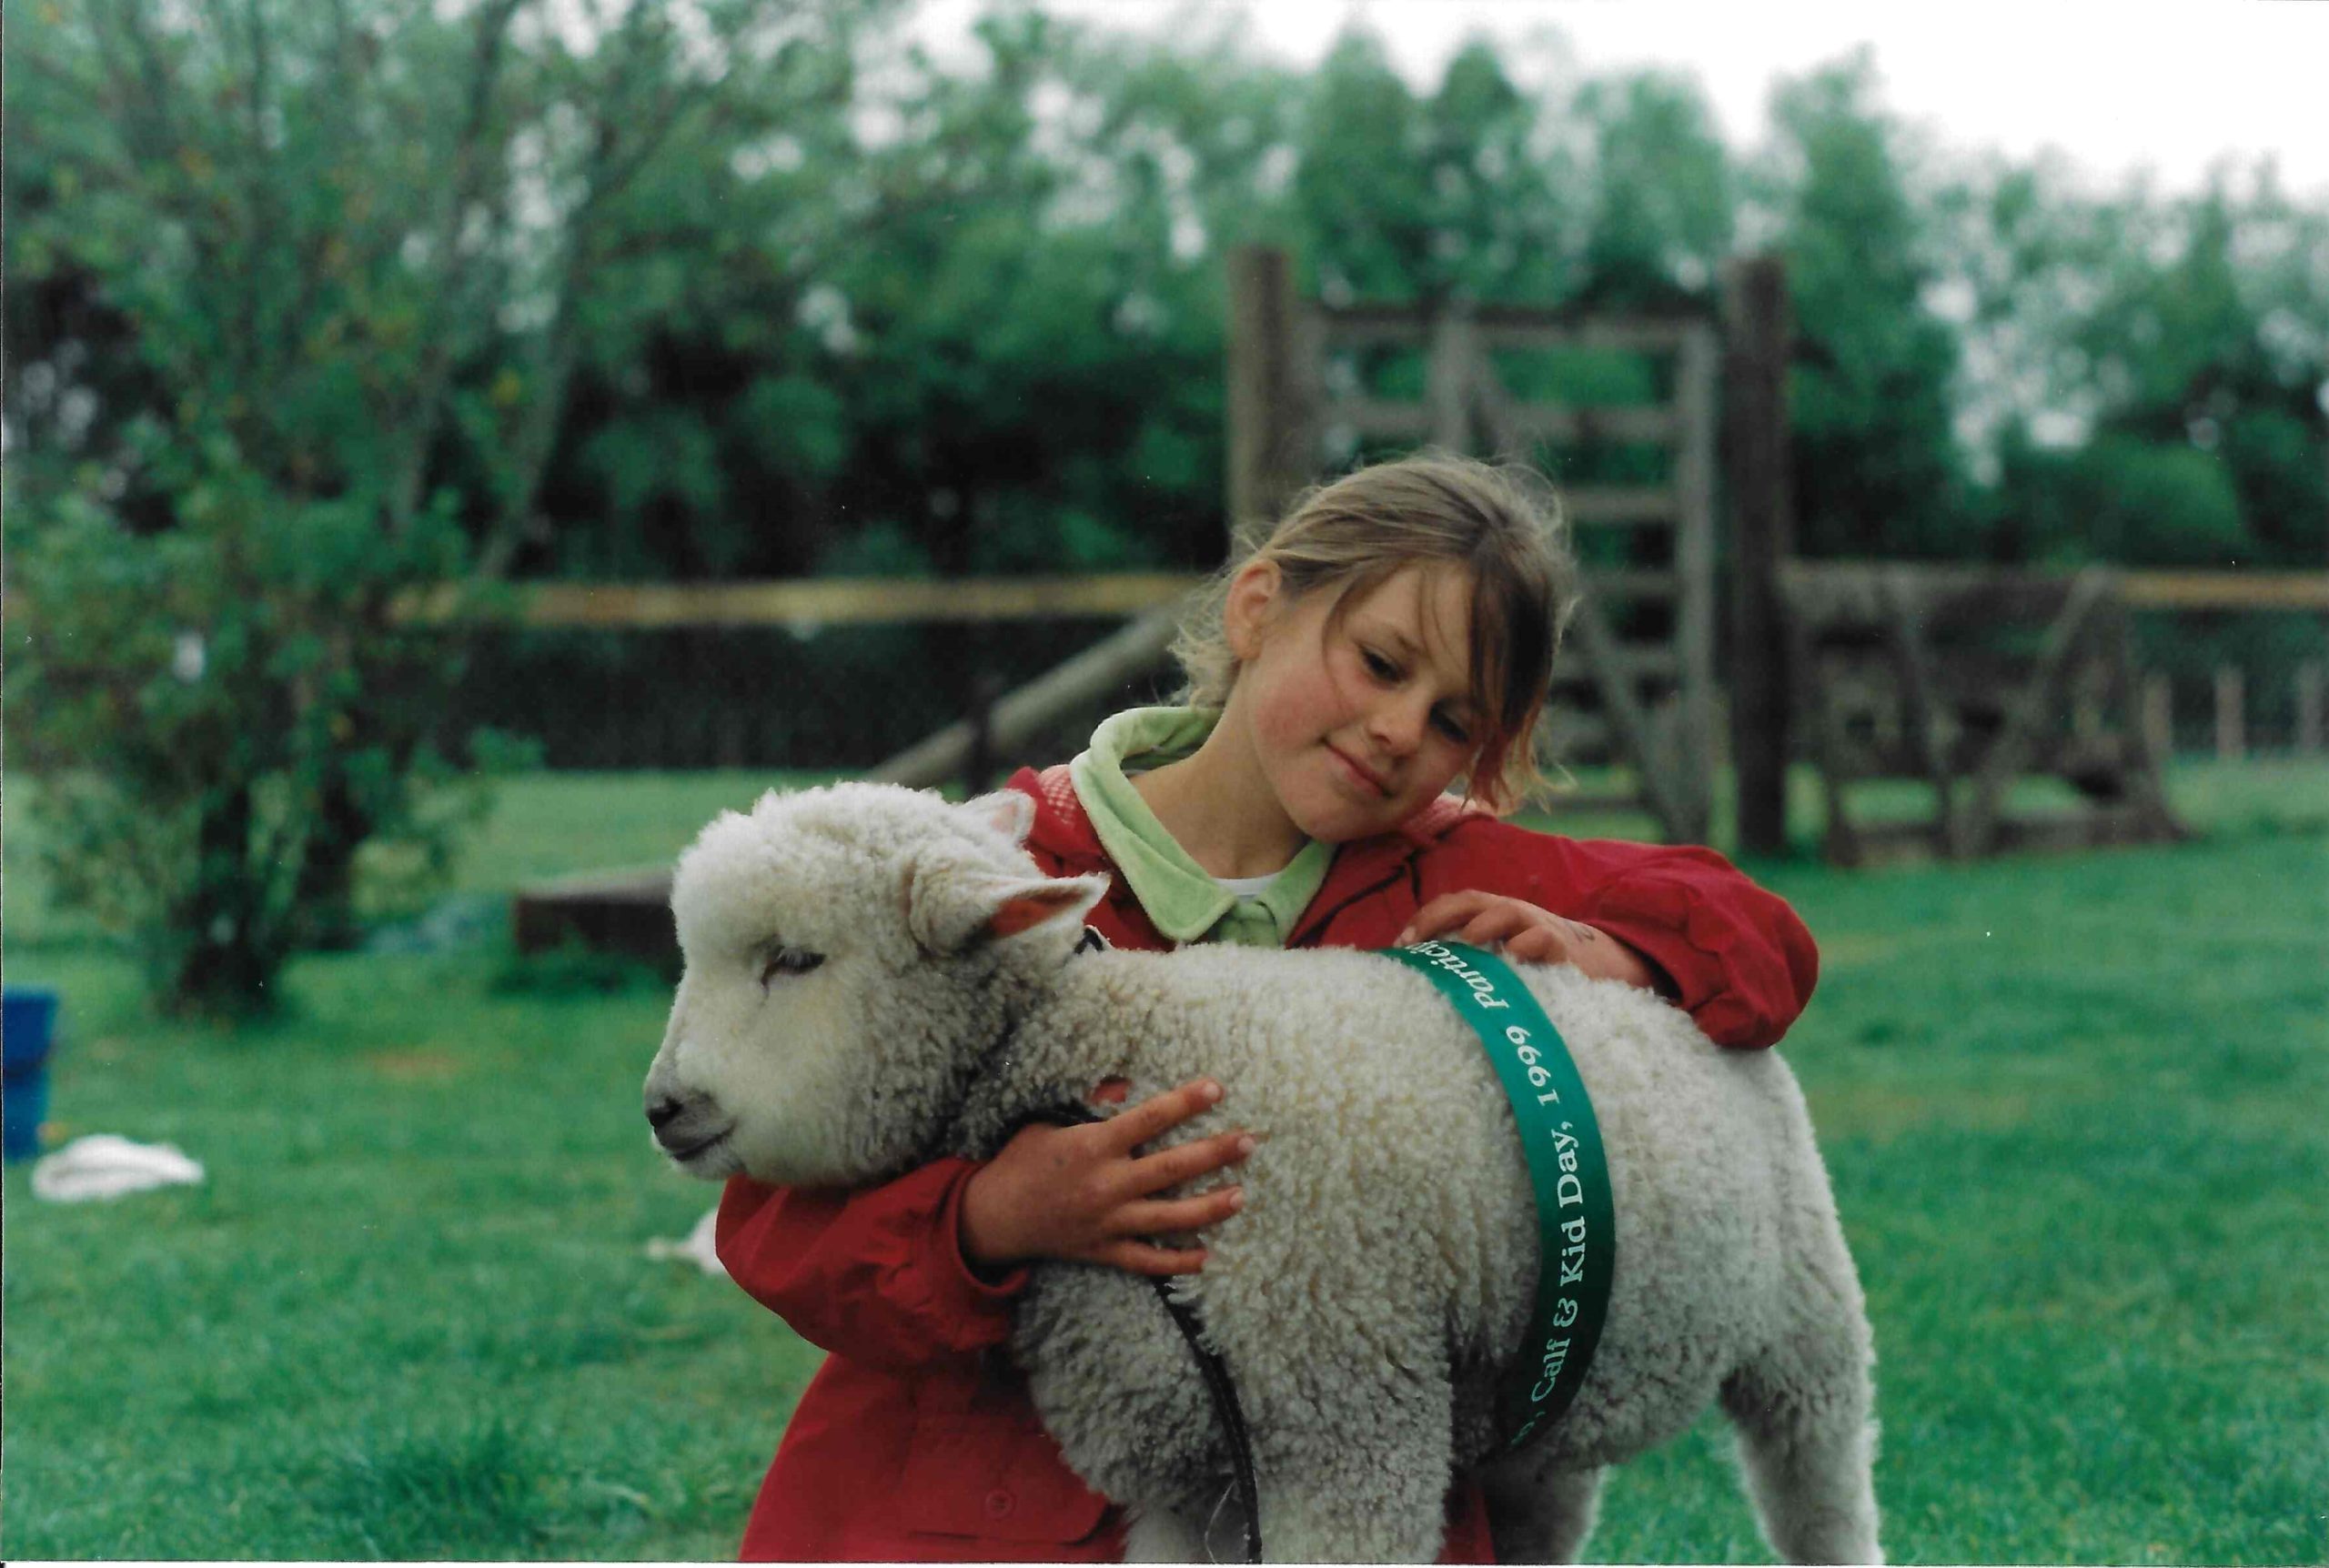 Home grown - Growing up in rural New Zealand, many children participate in lamb calf and kid day, where you take your lamb (or calf or baby goat) to school and compete in leading, following, and condition classes. Pictured is me and 'Thomas', mine and my brother's lamb.